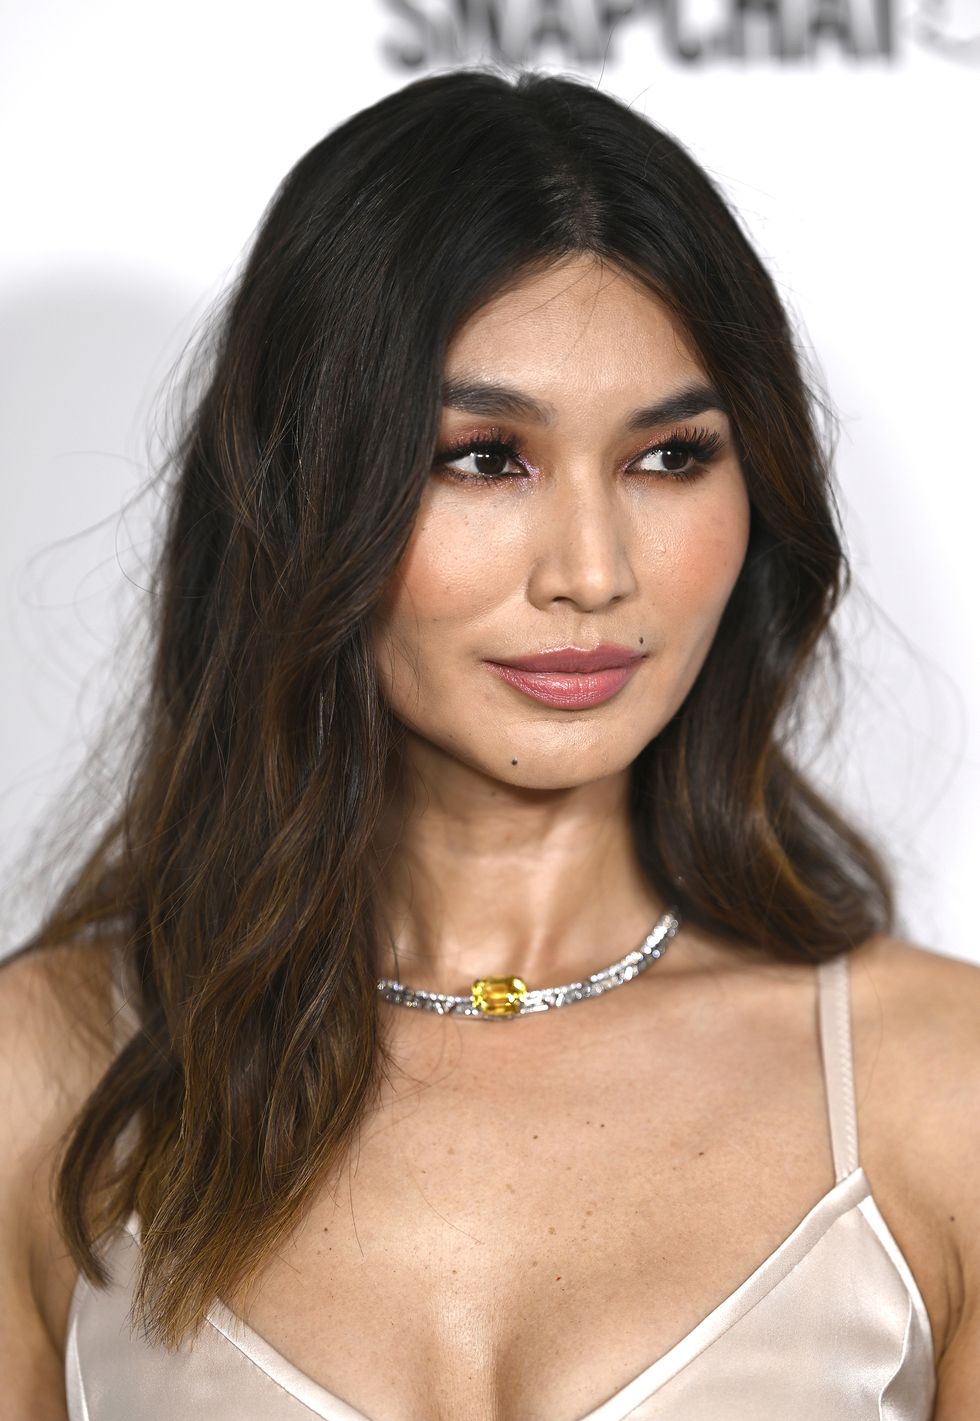 ELLE Style Awards: Gemma Chan's Sultry Peach Make-Up And Laidback Waves